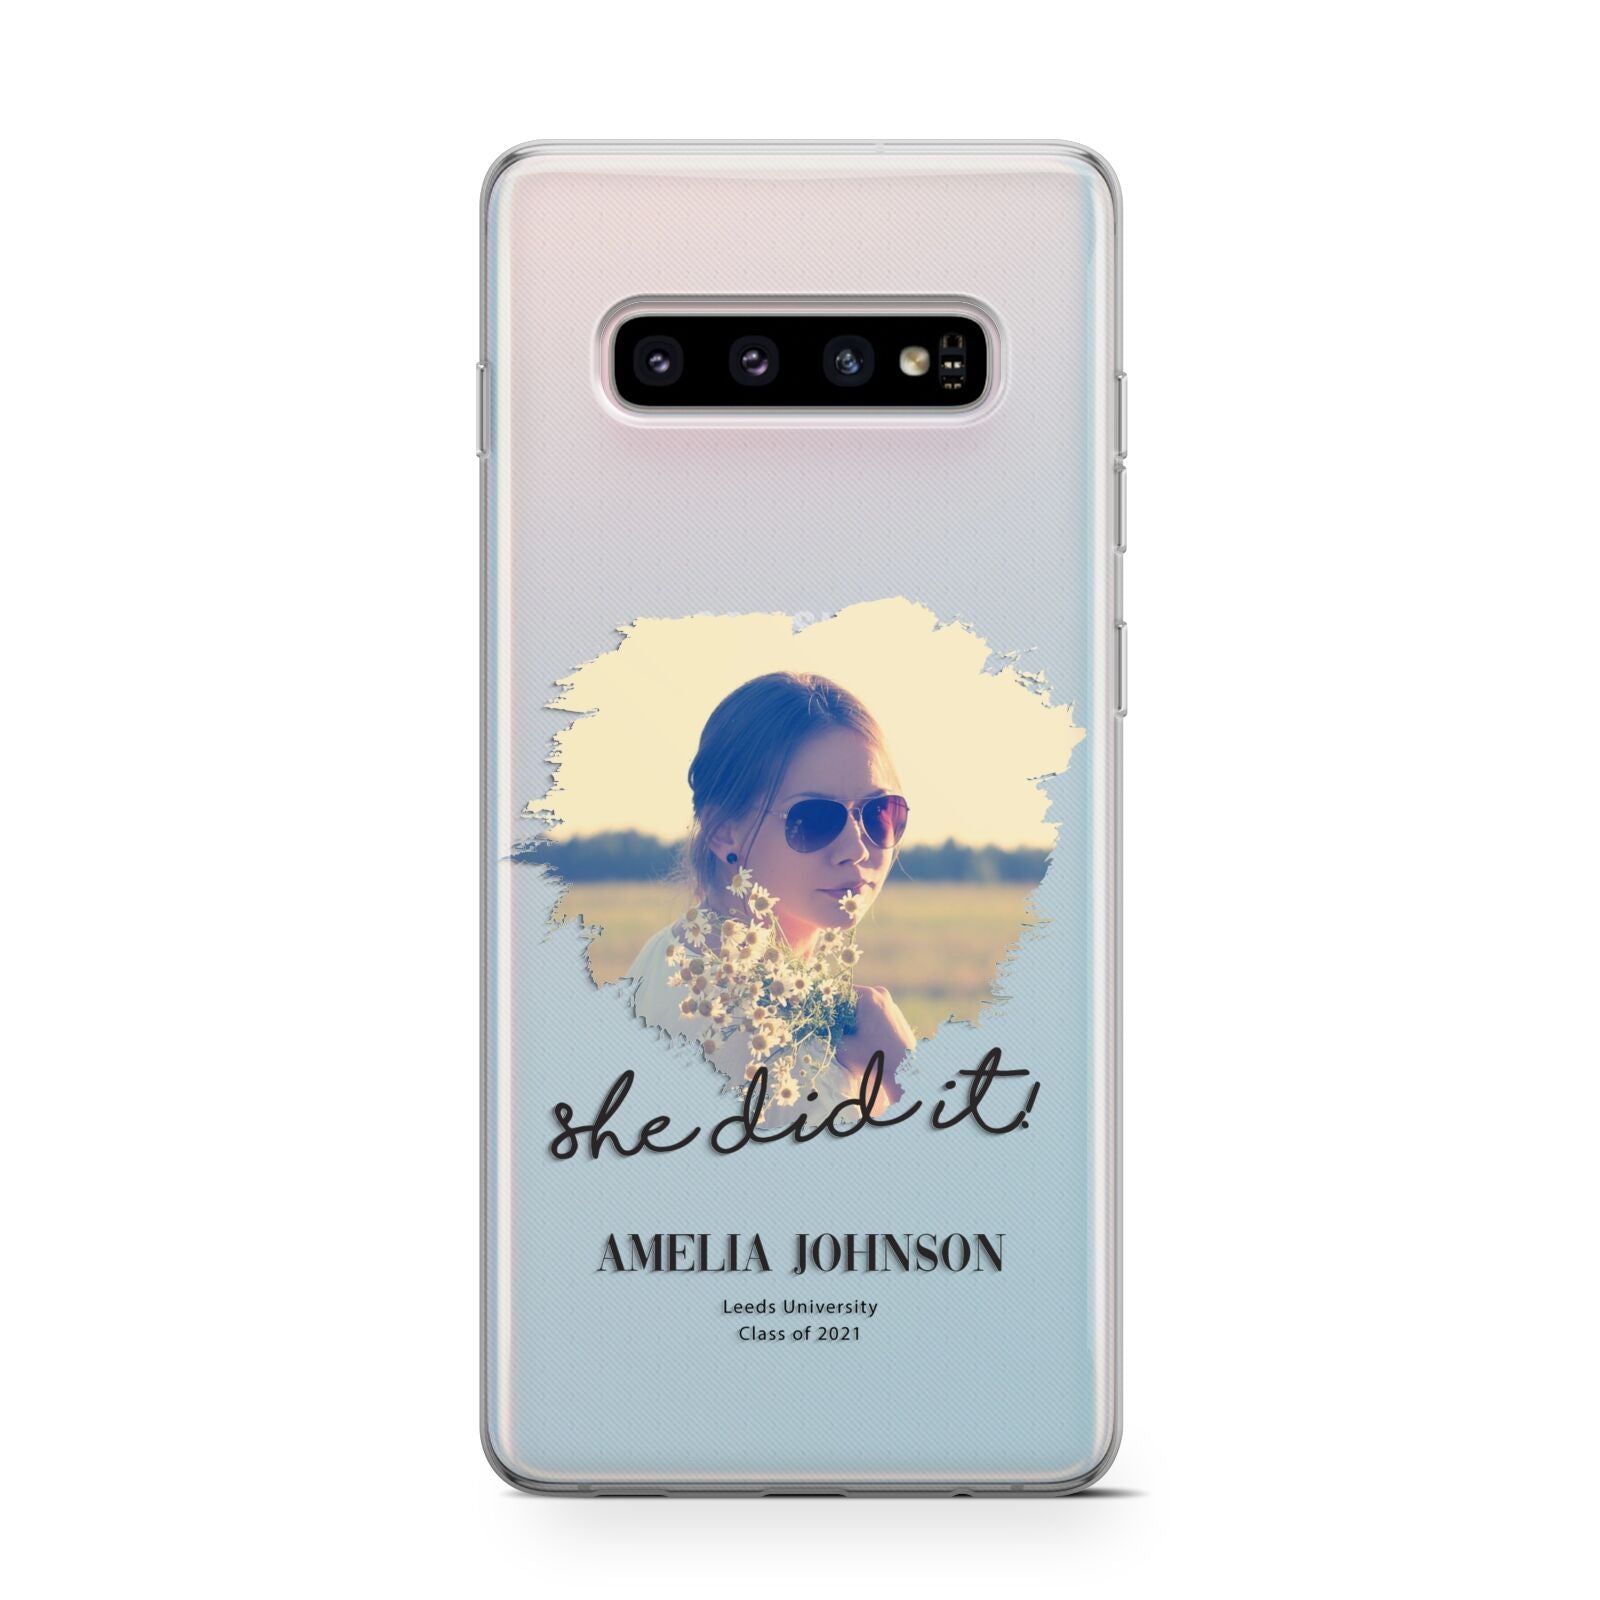 She Did It Graduation Photo with Name Samsung Galaxy S10 Case